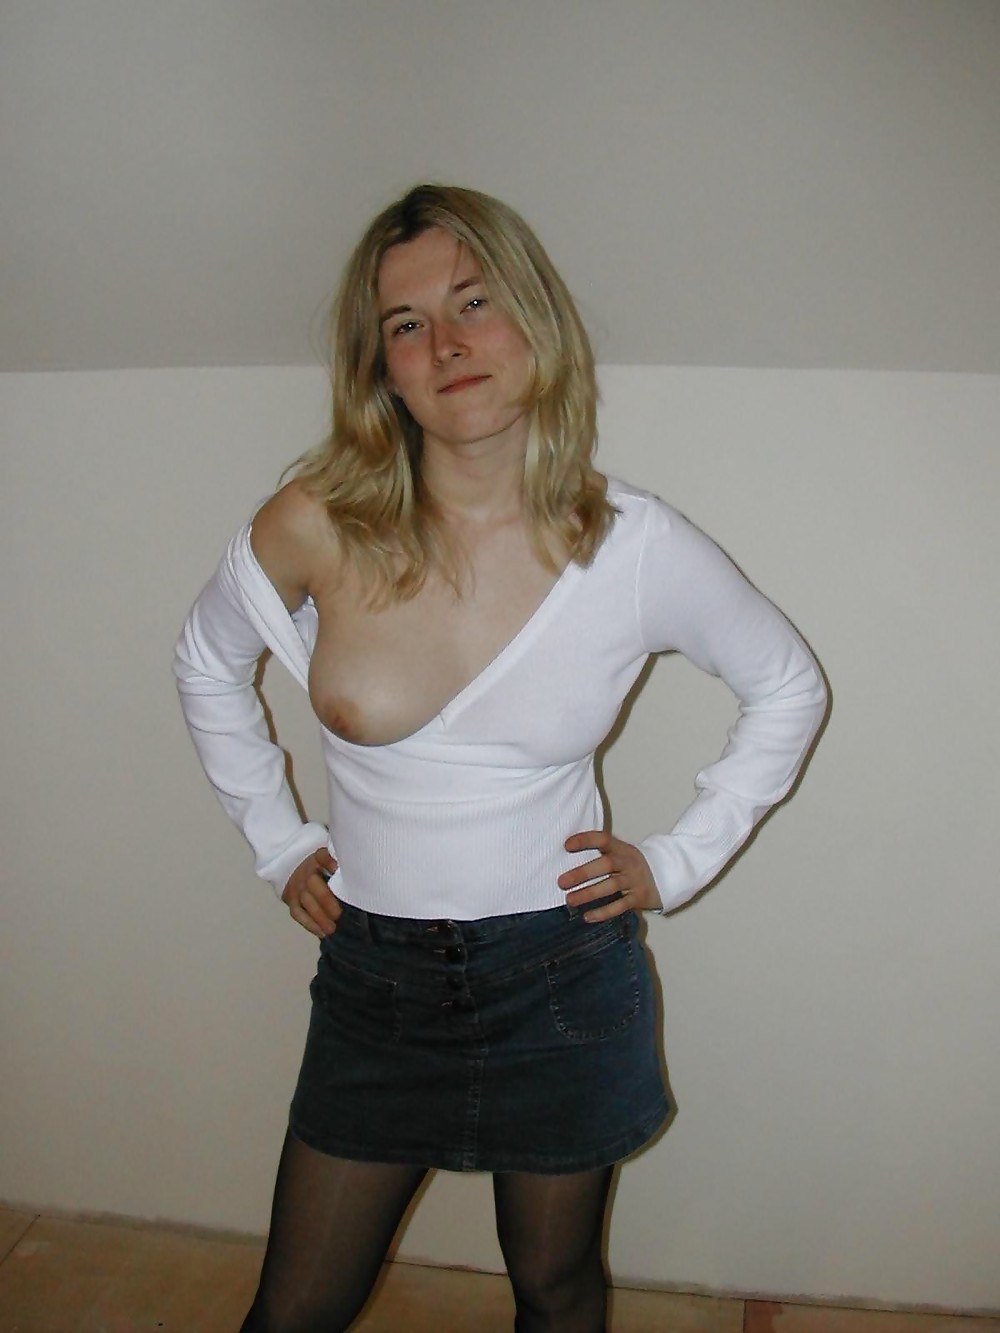 ALL AMATEUR - Here is CHLOE #1879843